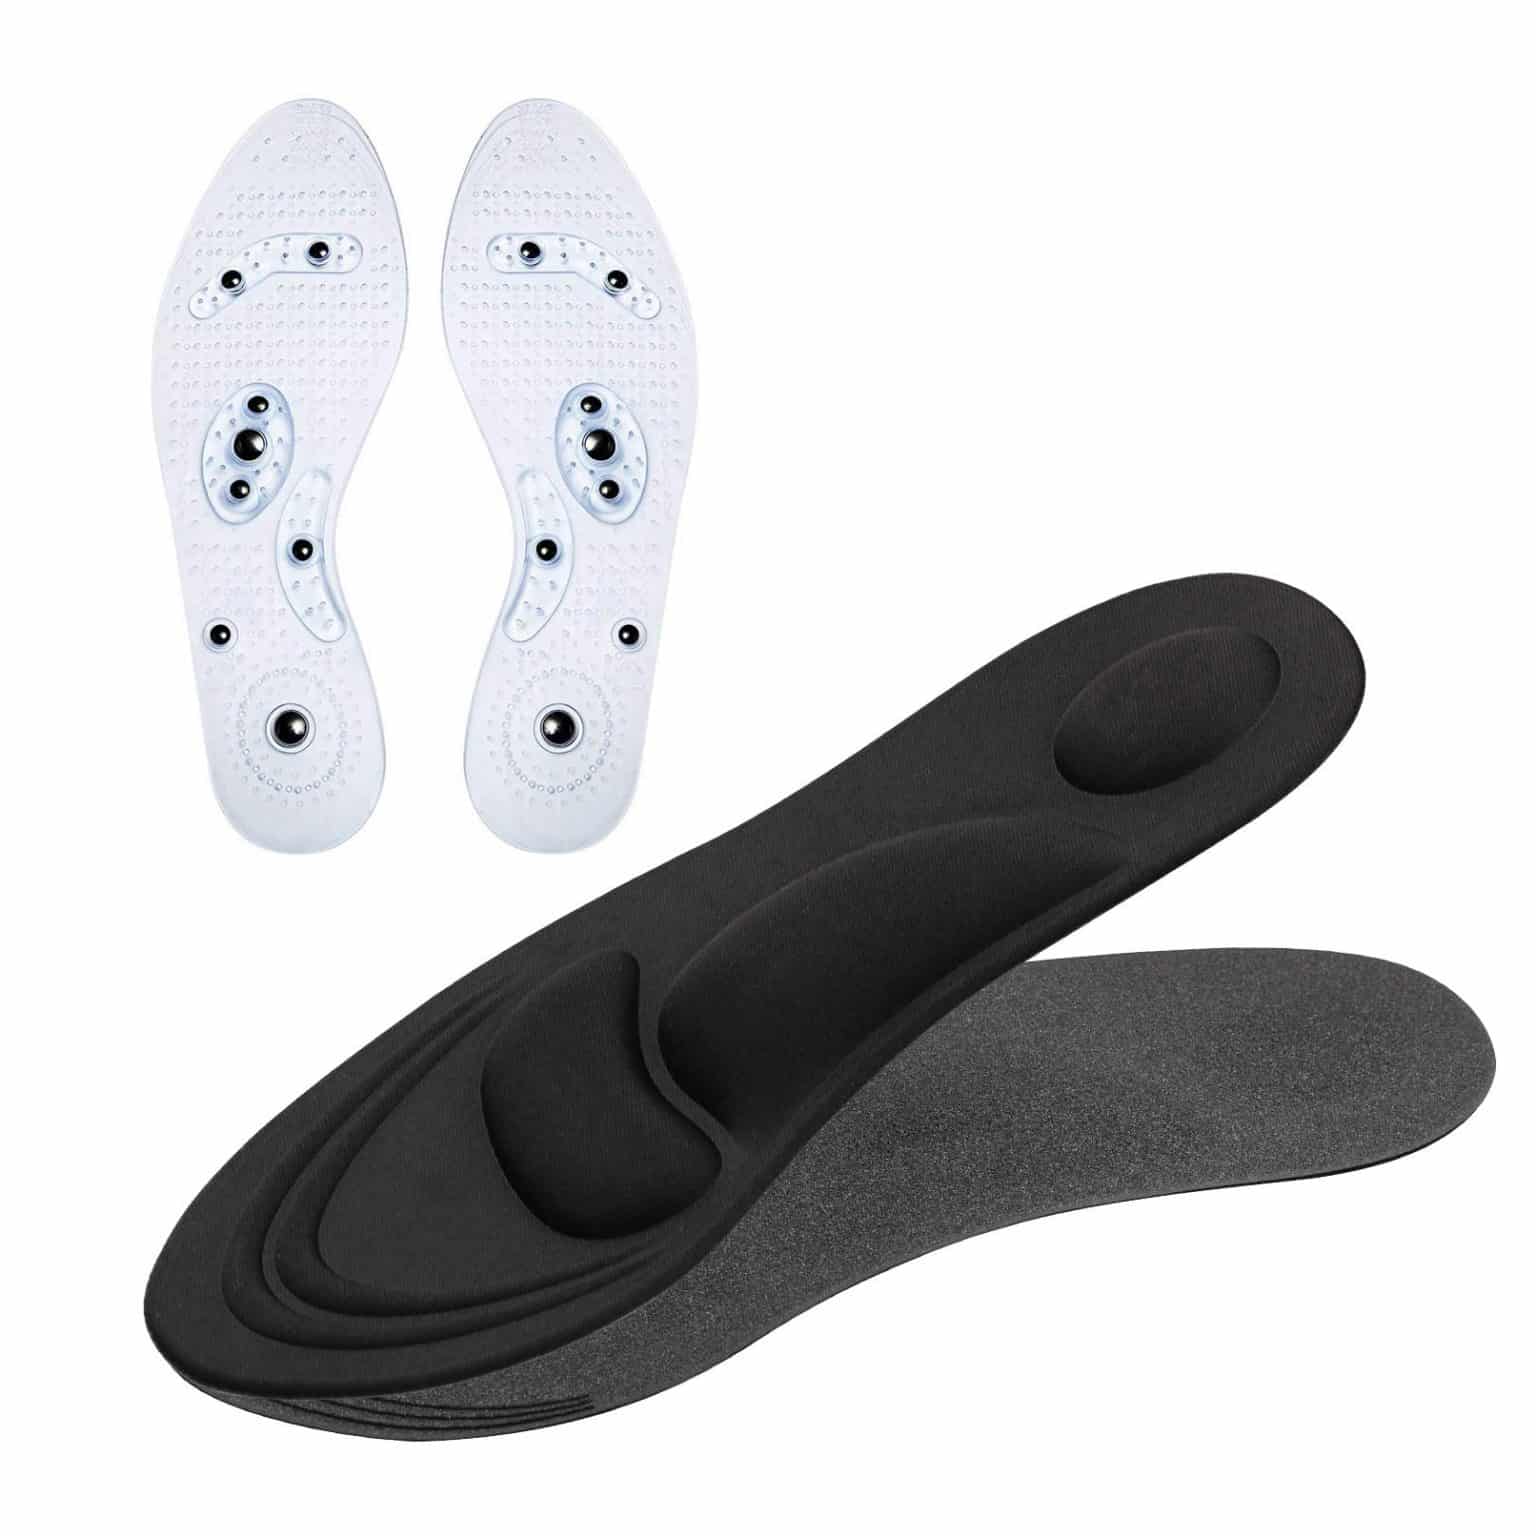 Top 10 Best Magnetic Reflex Insoles in 2021 Reviews